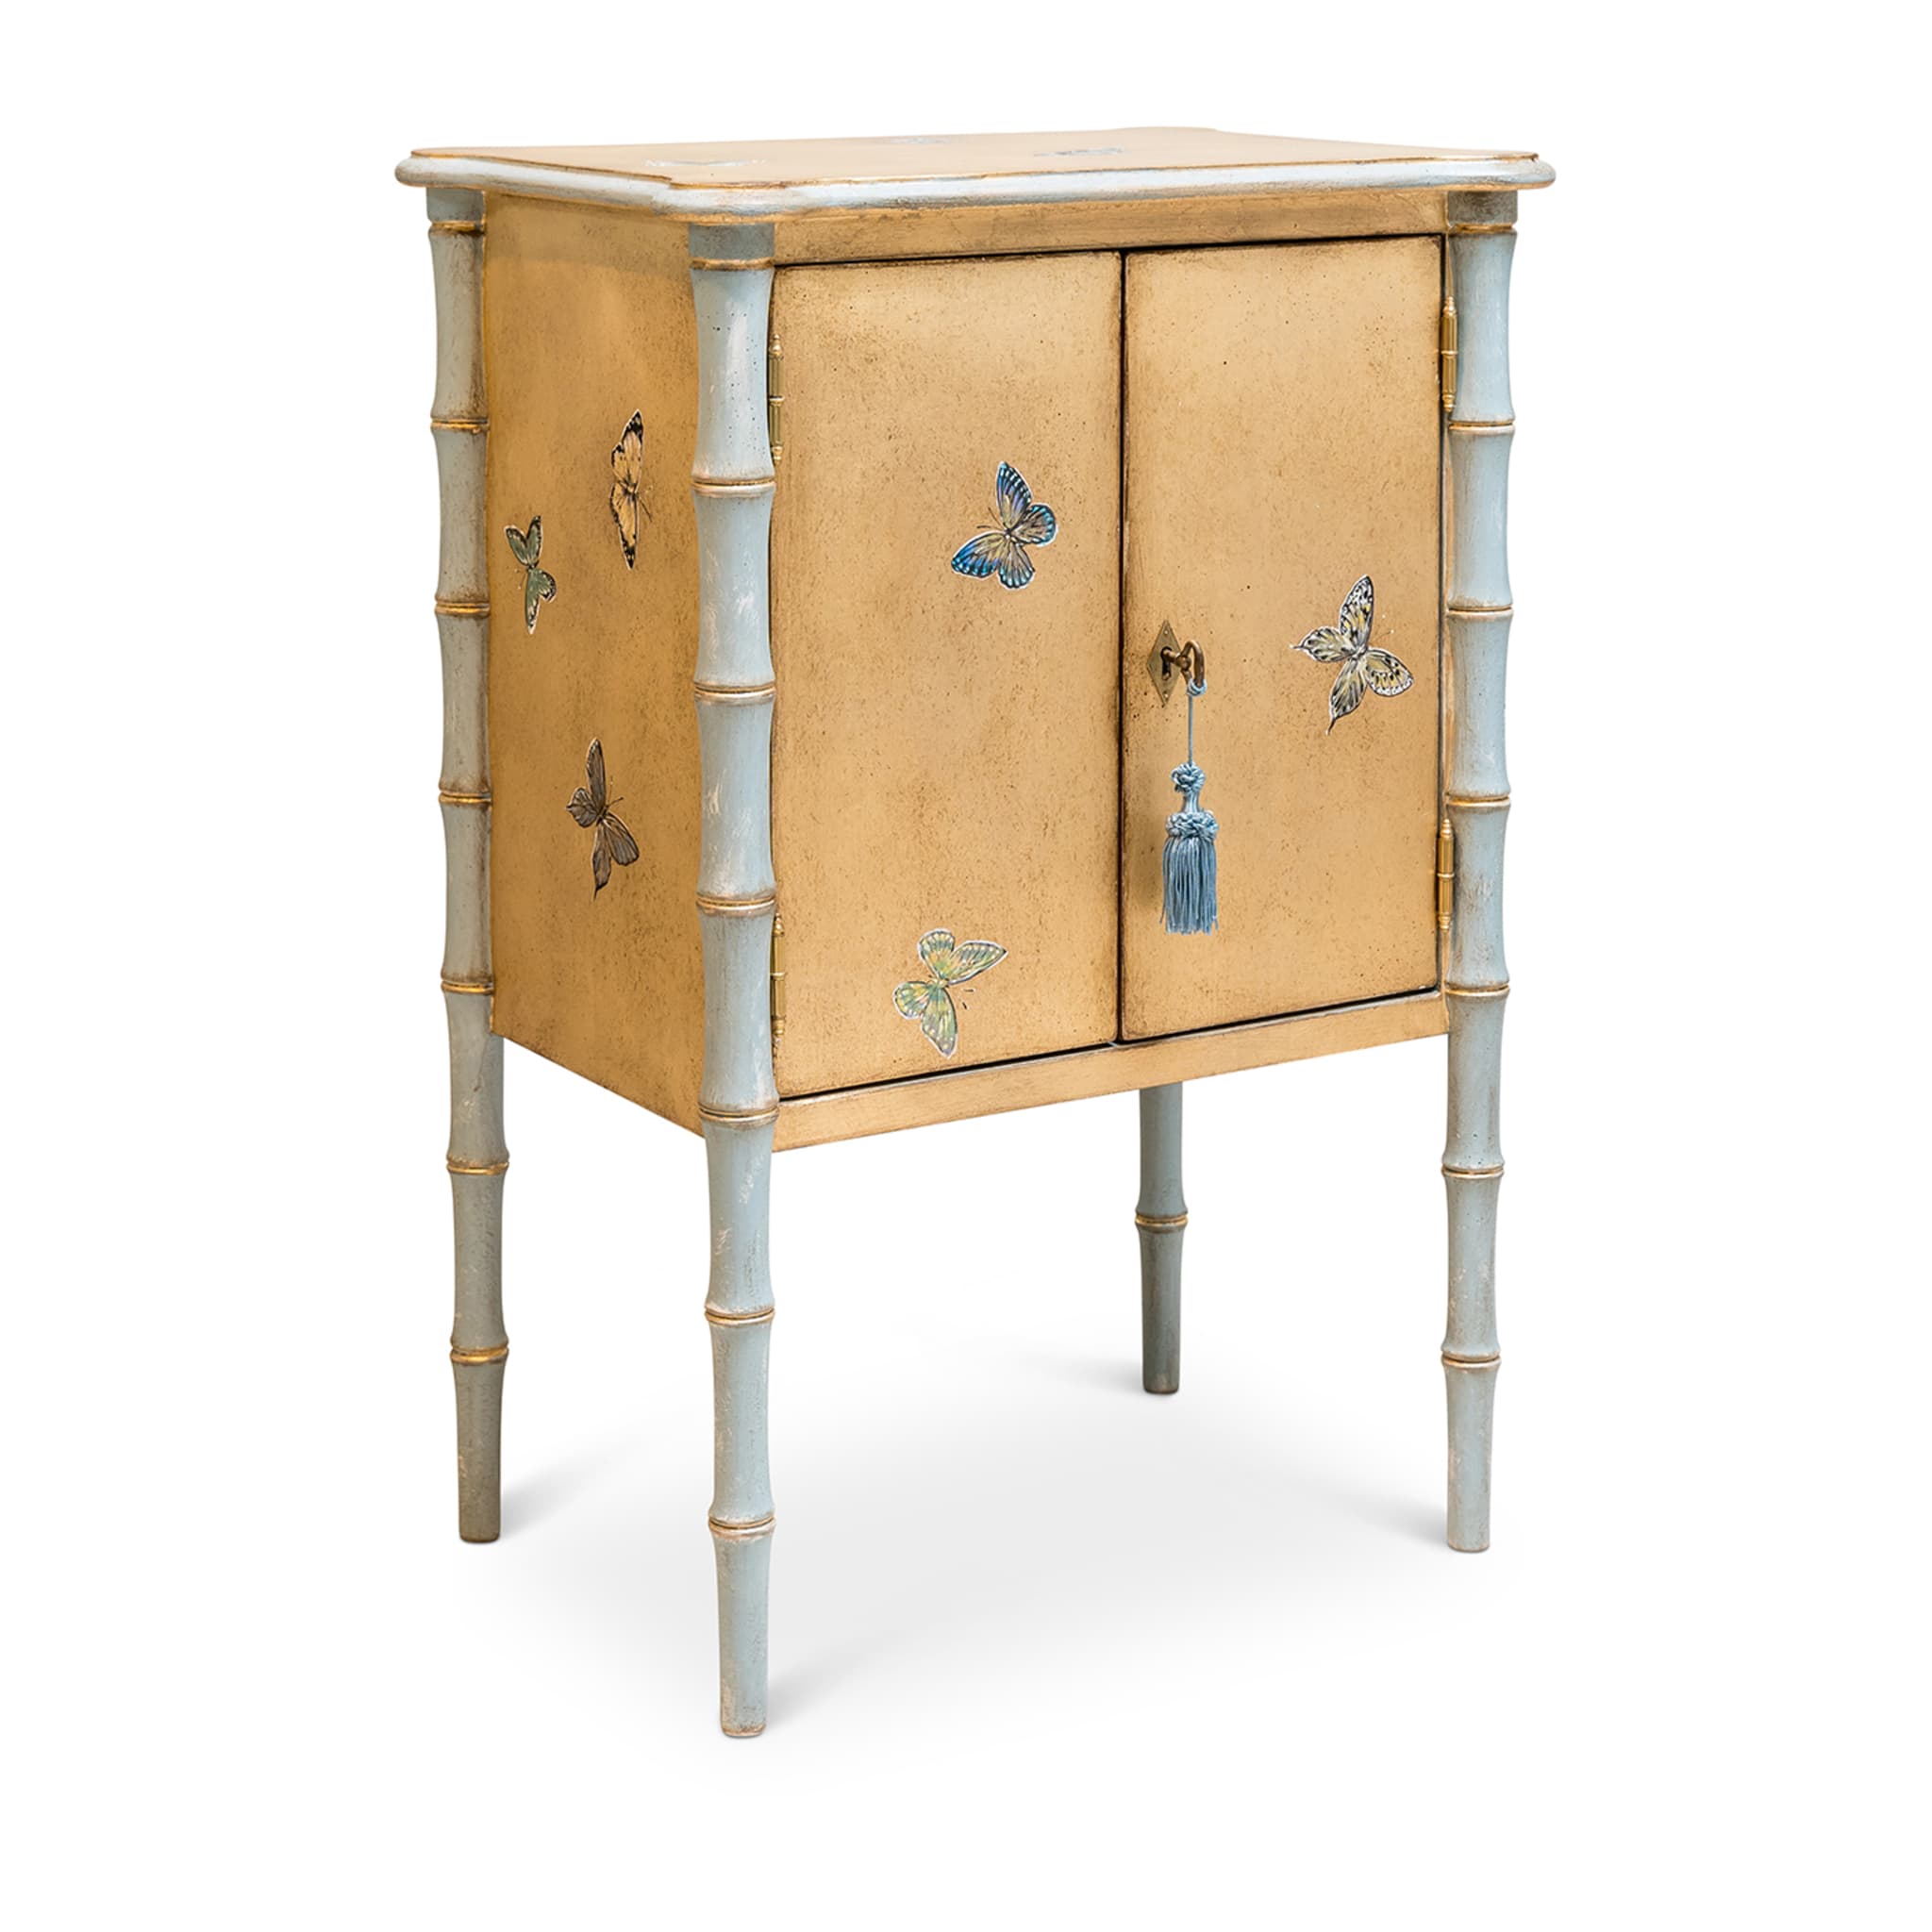 Gold-Leaf Lombardia Bamboo Nightstand with Butterflies - Alternative view 2